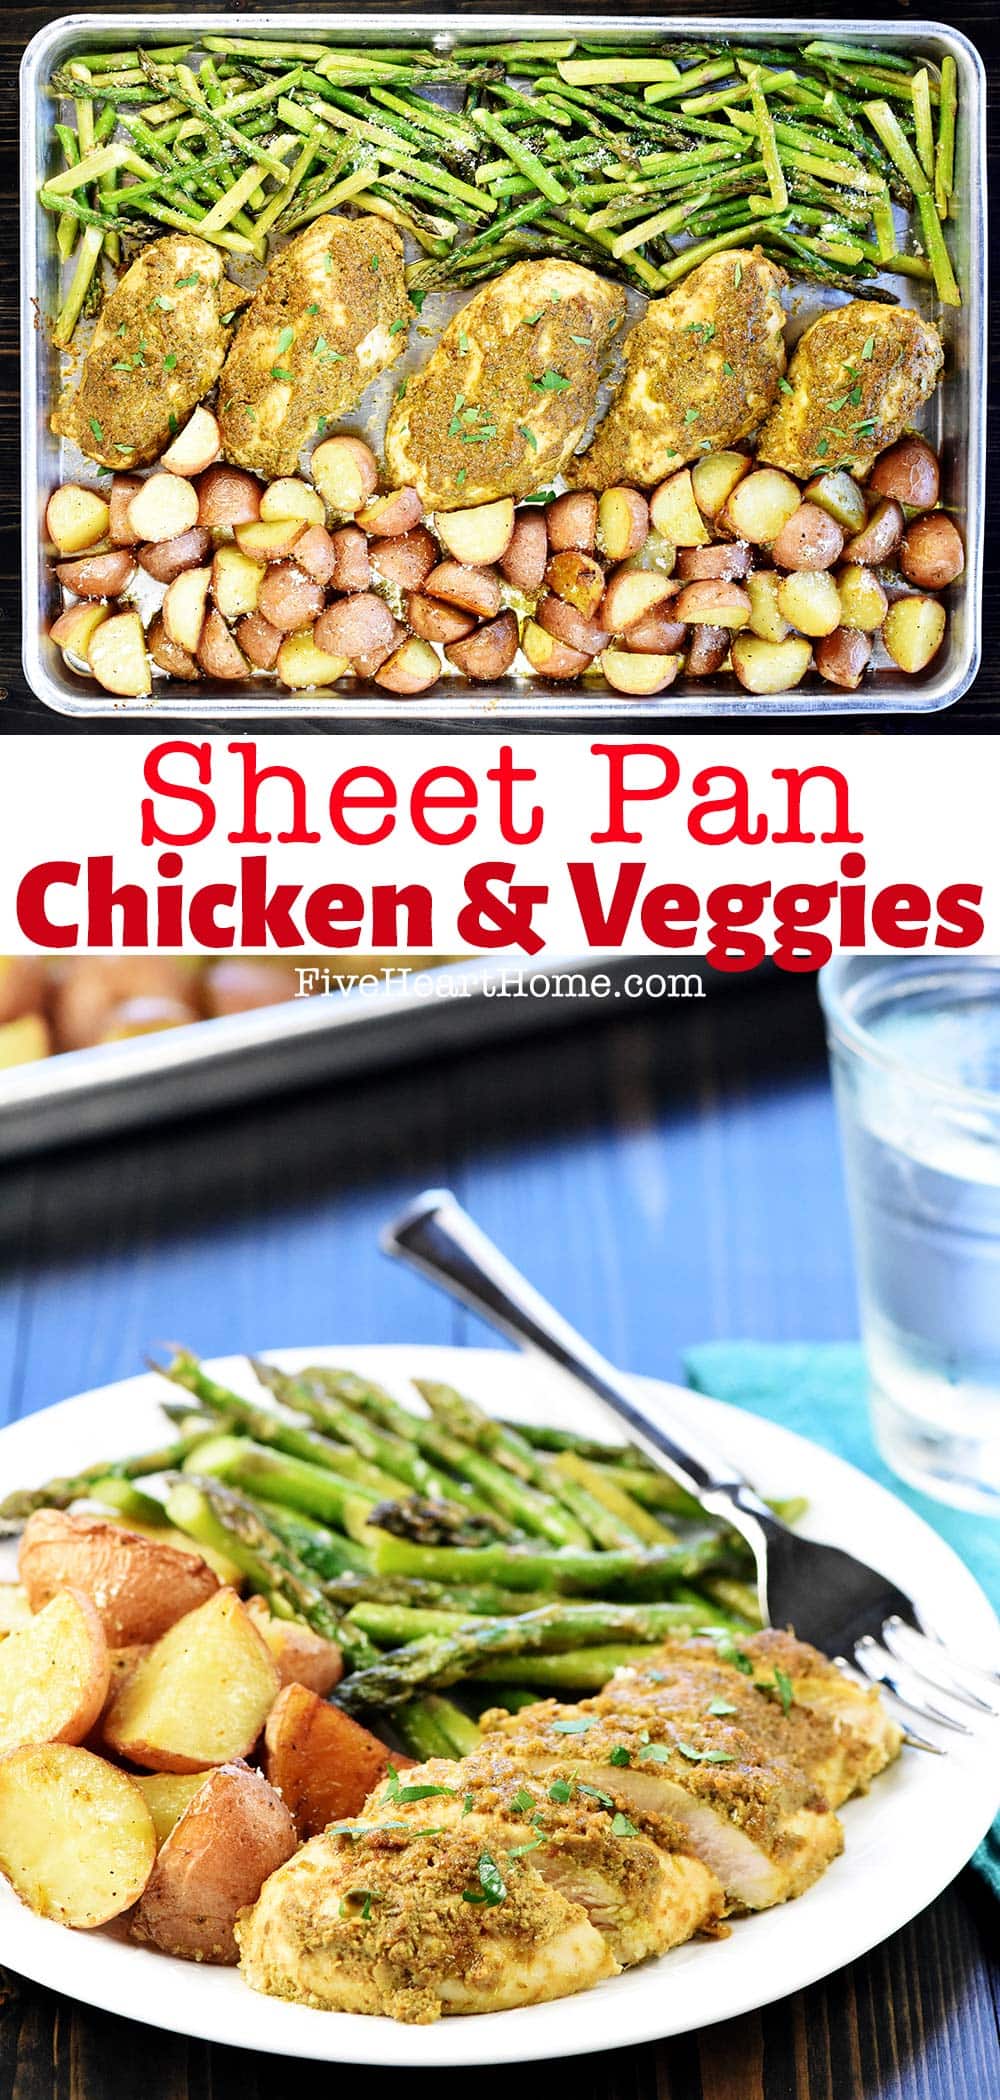 Sheet Pan Chicken and Veggies ~ a flavorful, quick and easy, complete dinner recipe that bakes up on just one pan, featuring pesto-coated chicken breasts and roasted potatoes and asparagus! | FiveHeartHome.com via @fivehearthome